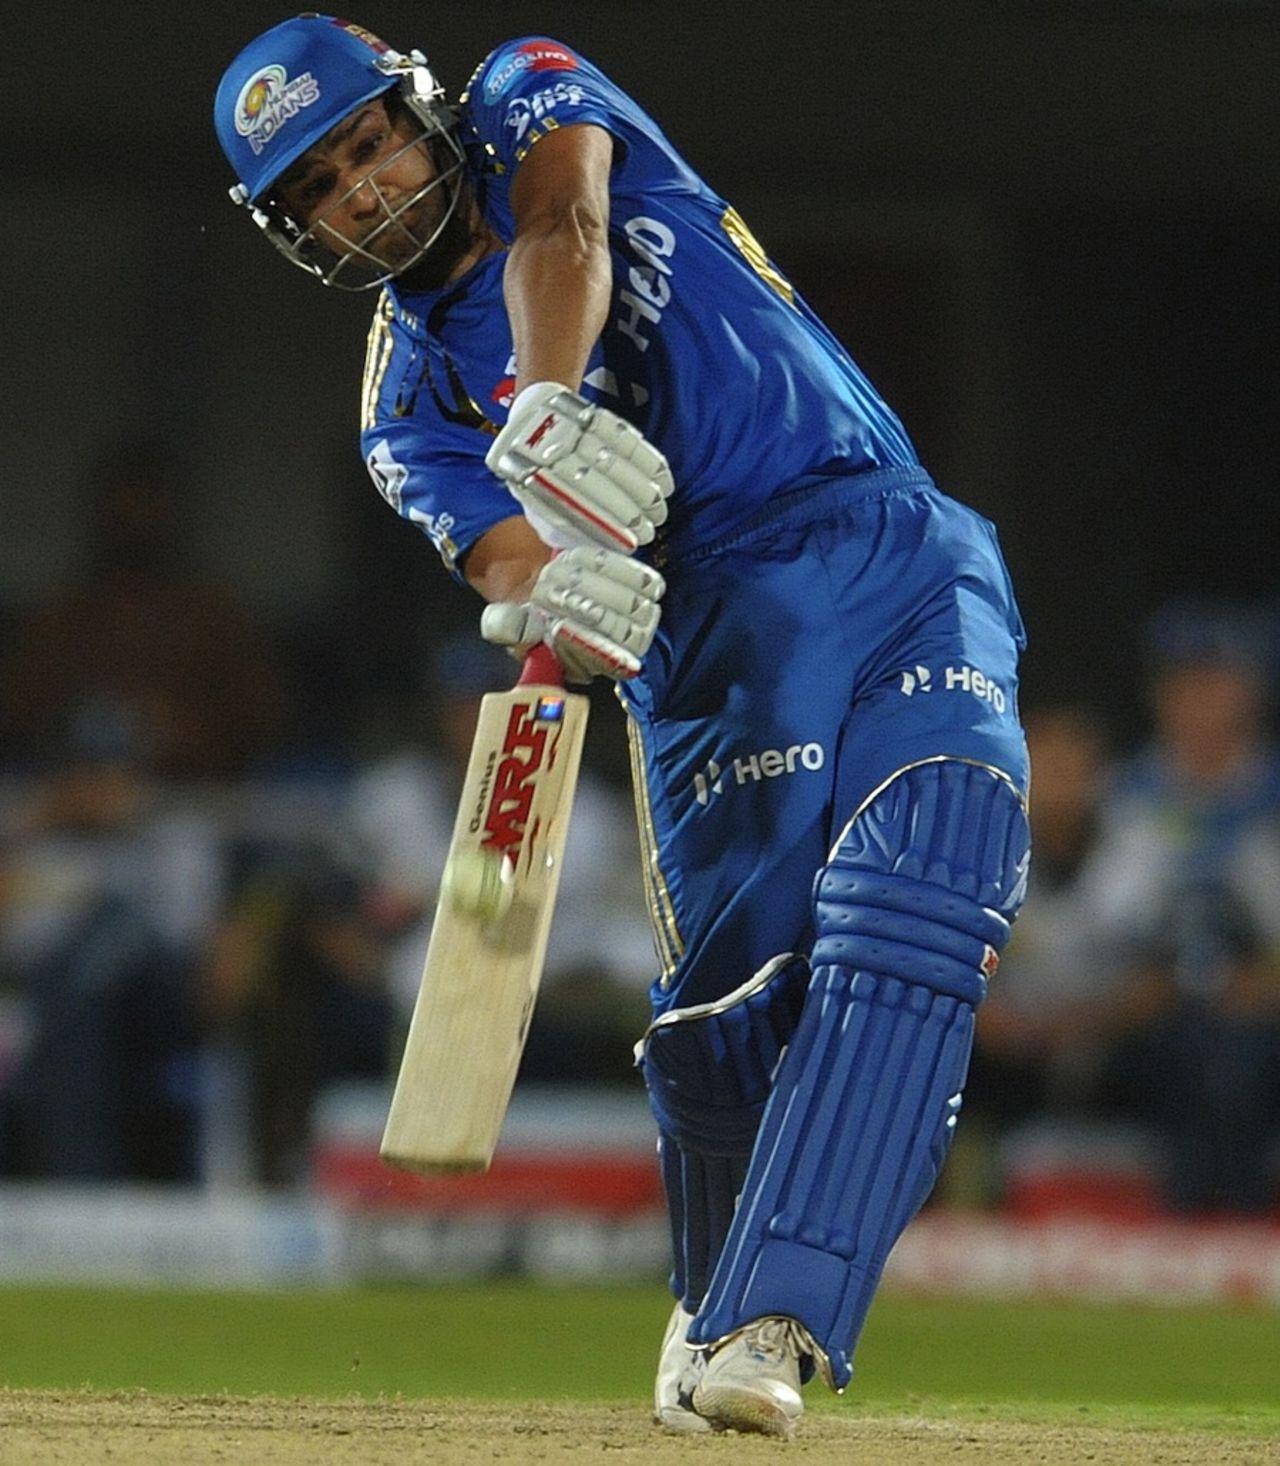 Rohit Sharma hits one over extra cover, Deccan Chargers v Mumbai Indians, IPL 2012, Visakhapatnam, April 9, 2012